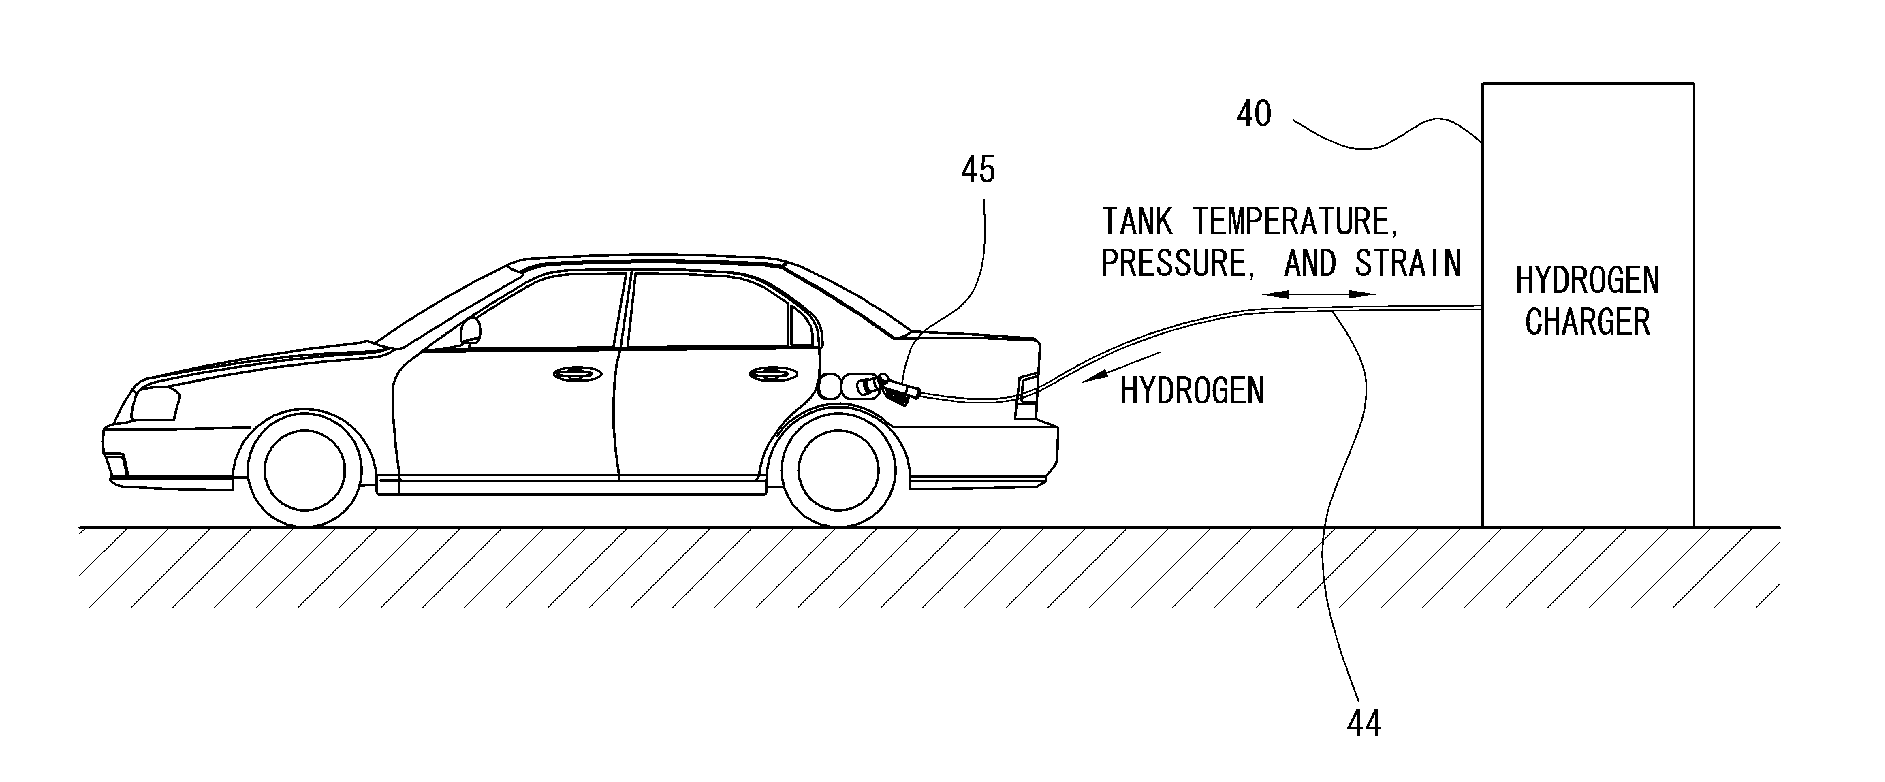 Real-time system for monitoring hydrogen tank expansion and a method for using same